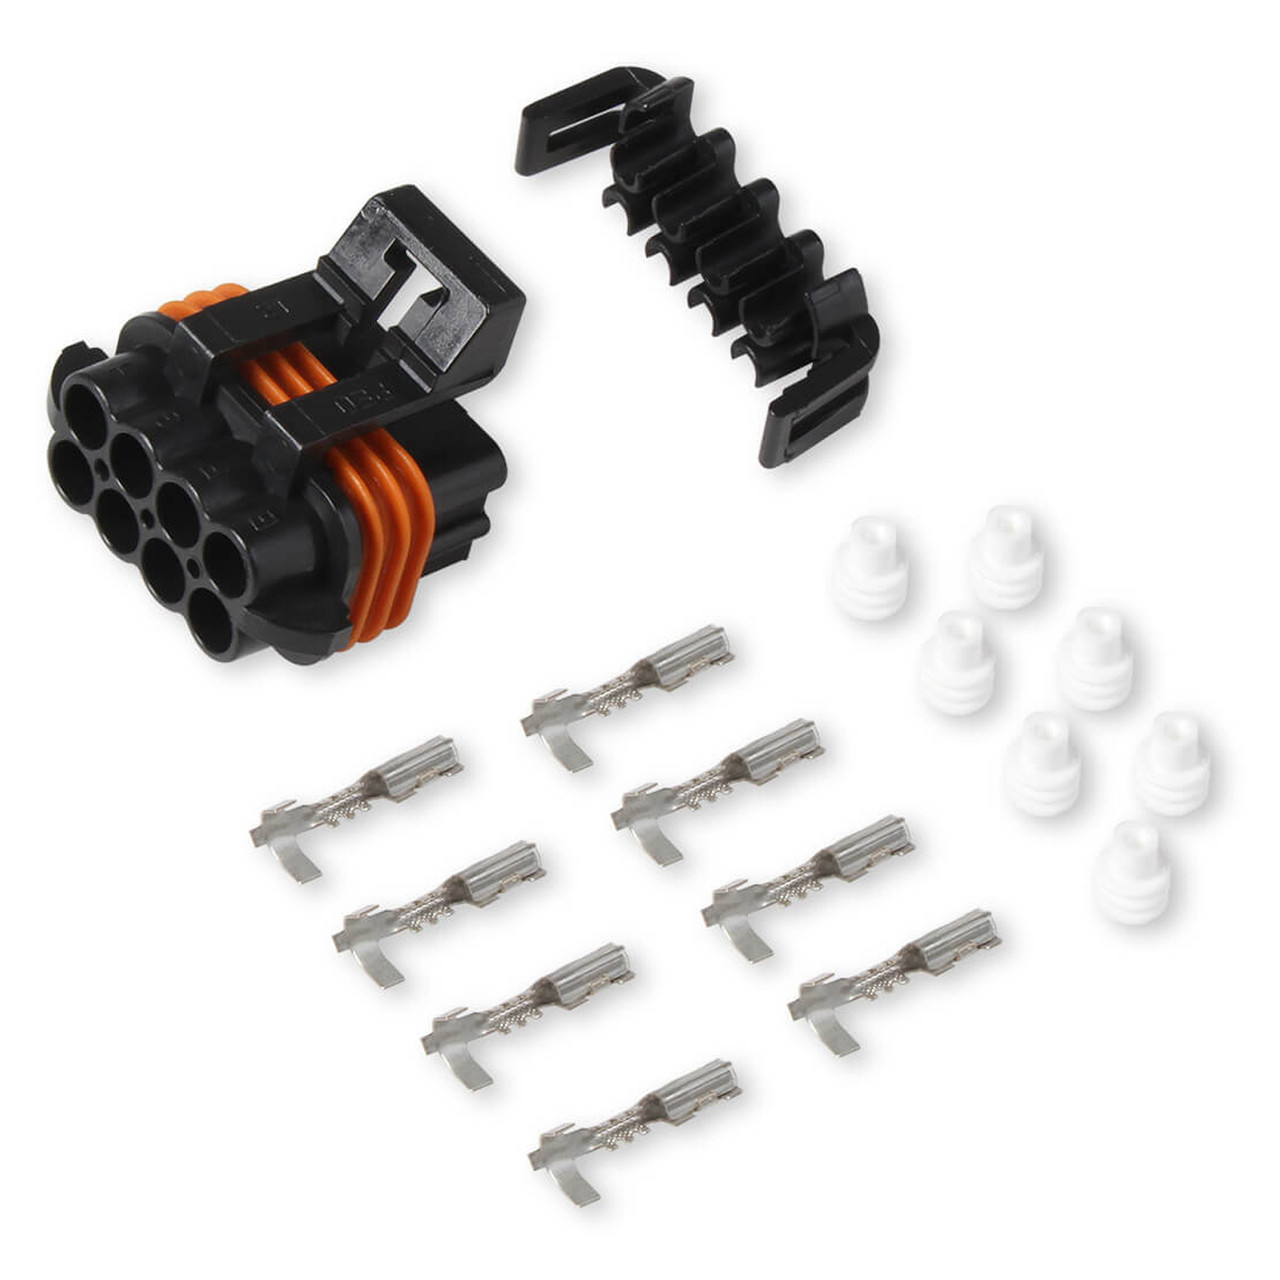 Input/Output Connector Kit - Female